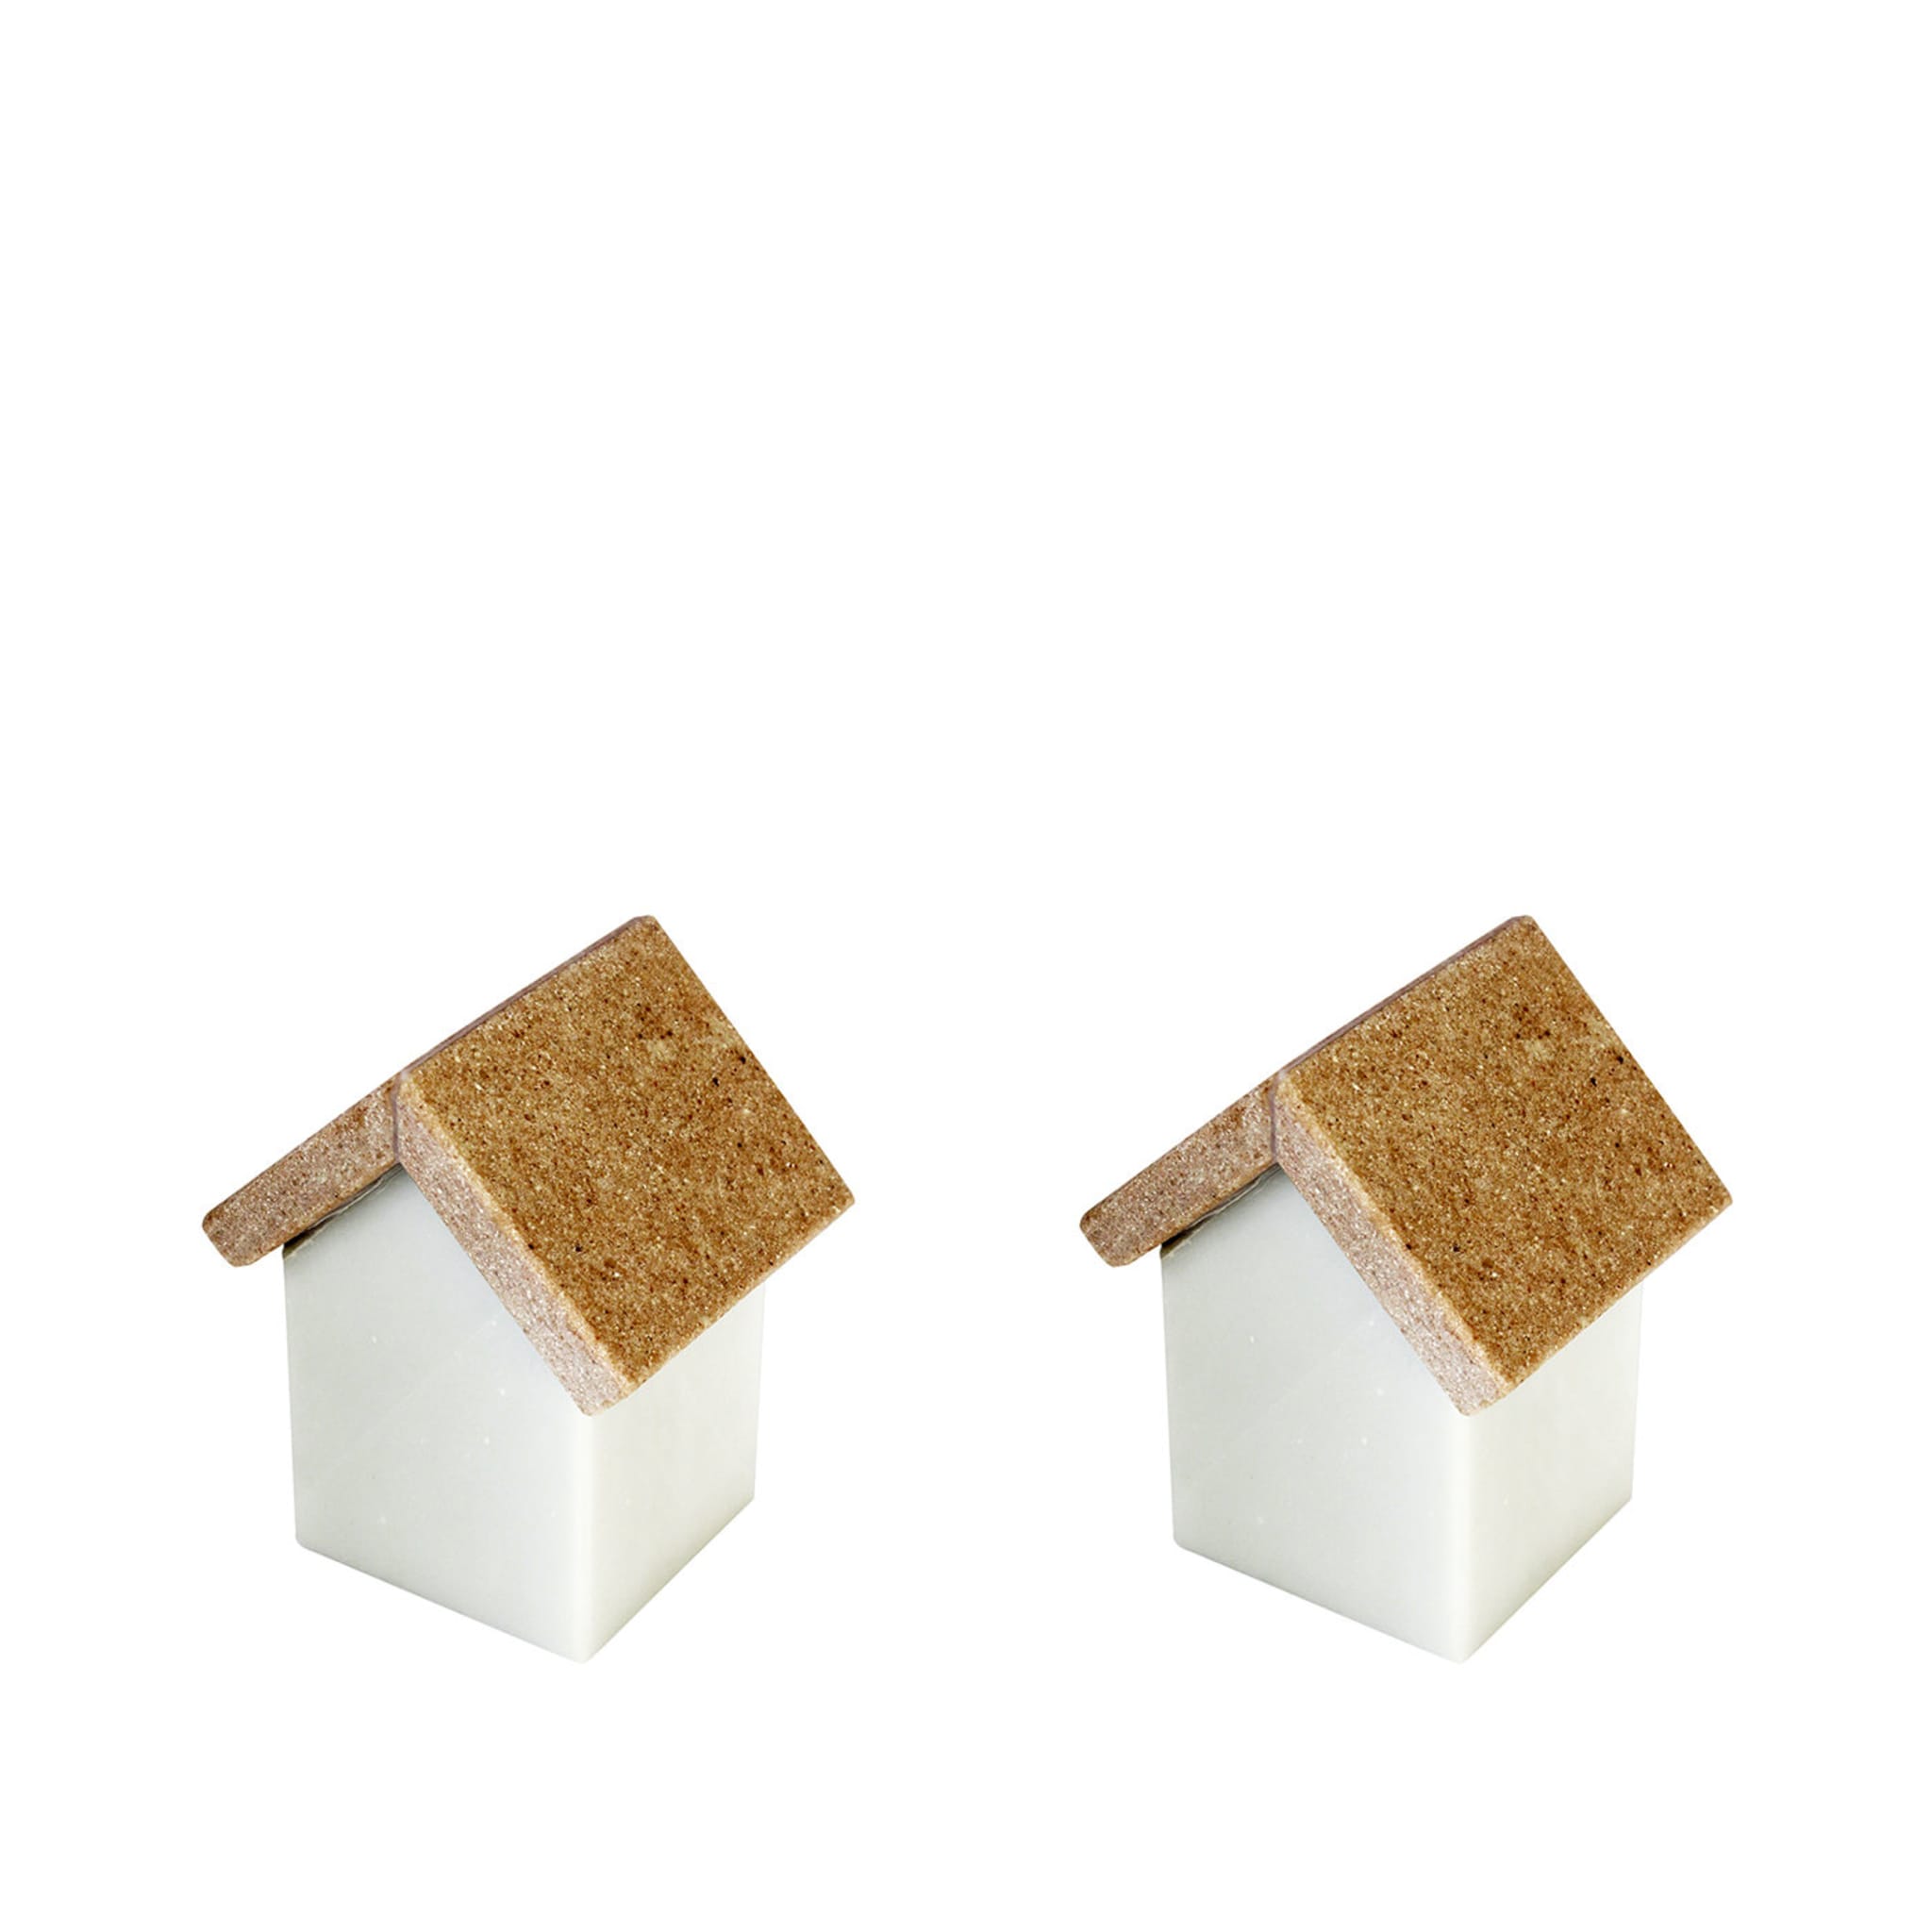 Set of 2 Little House Sculptures in Carrara and Portogallo Marbles by Paola Giubbani - Main view